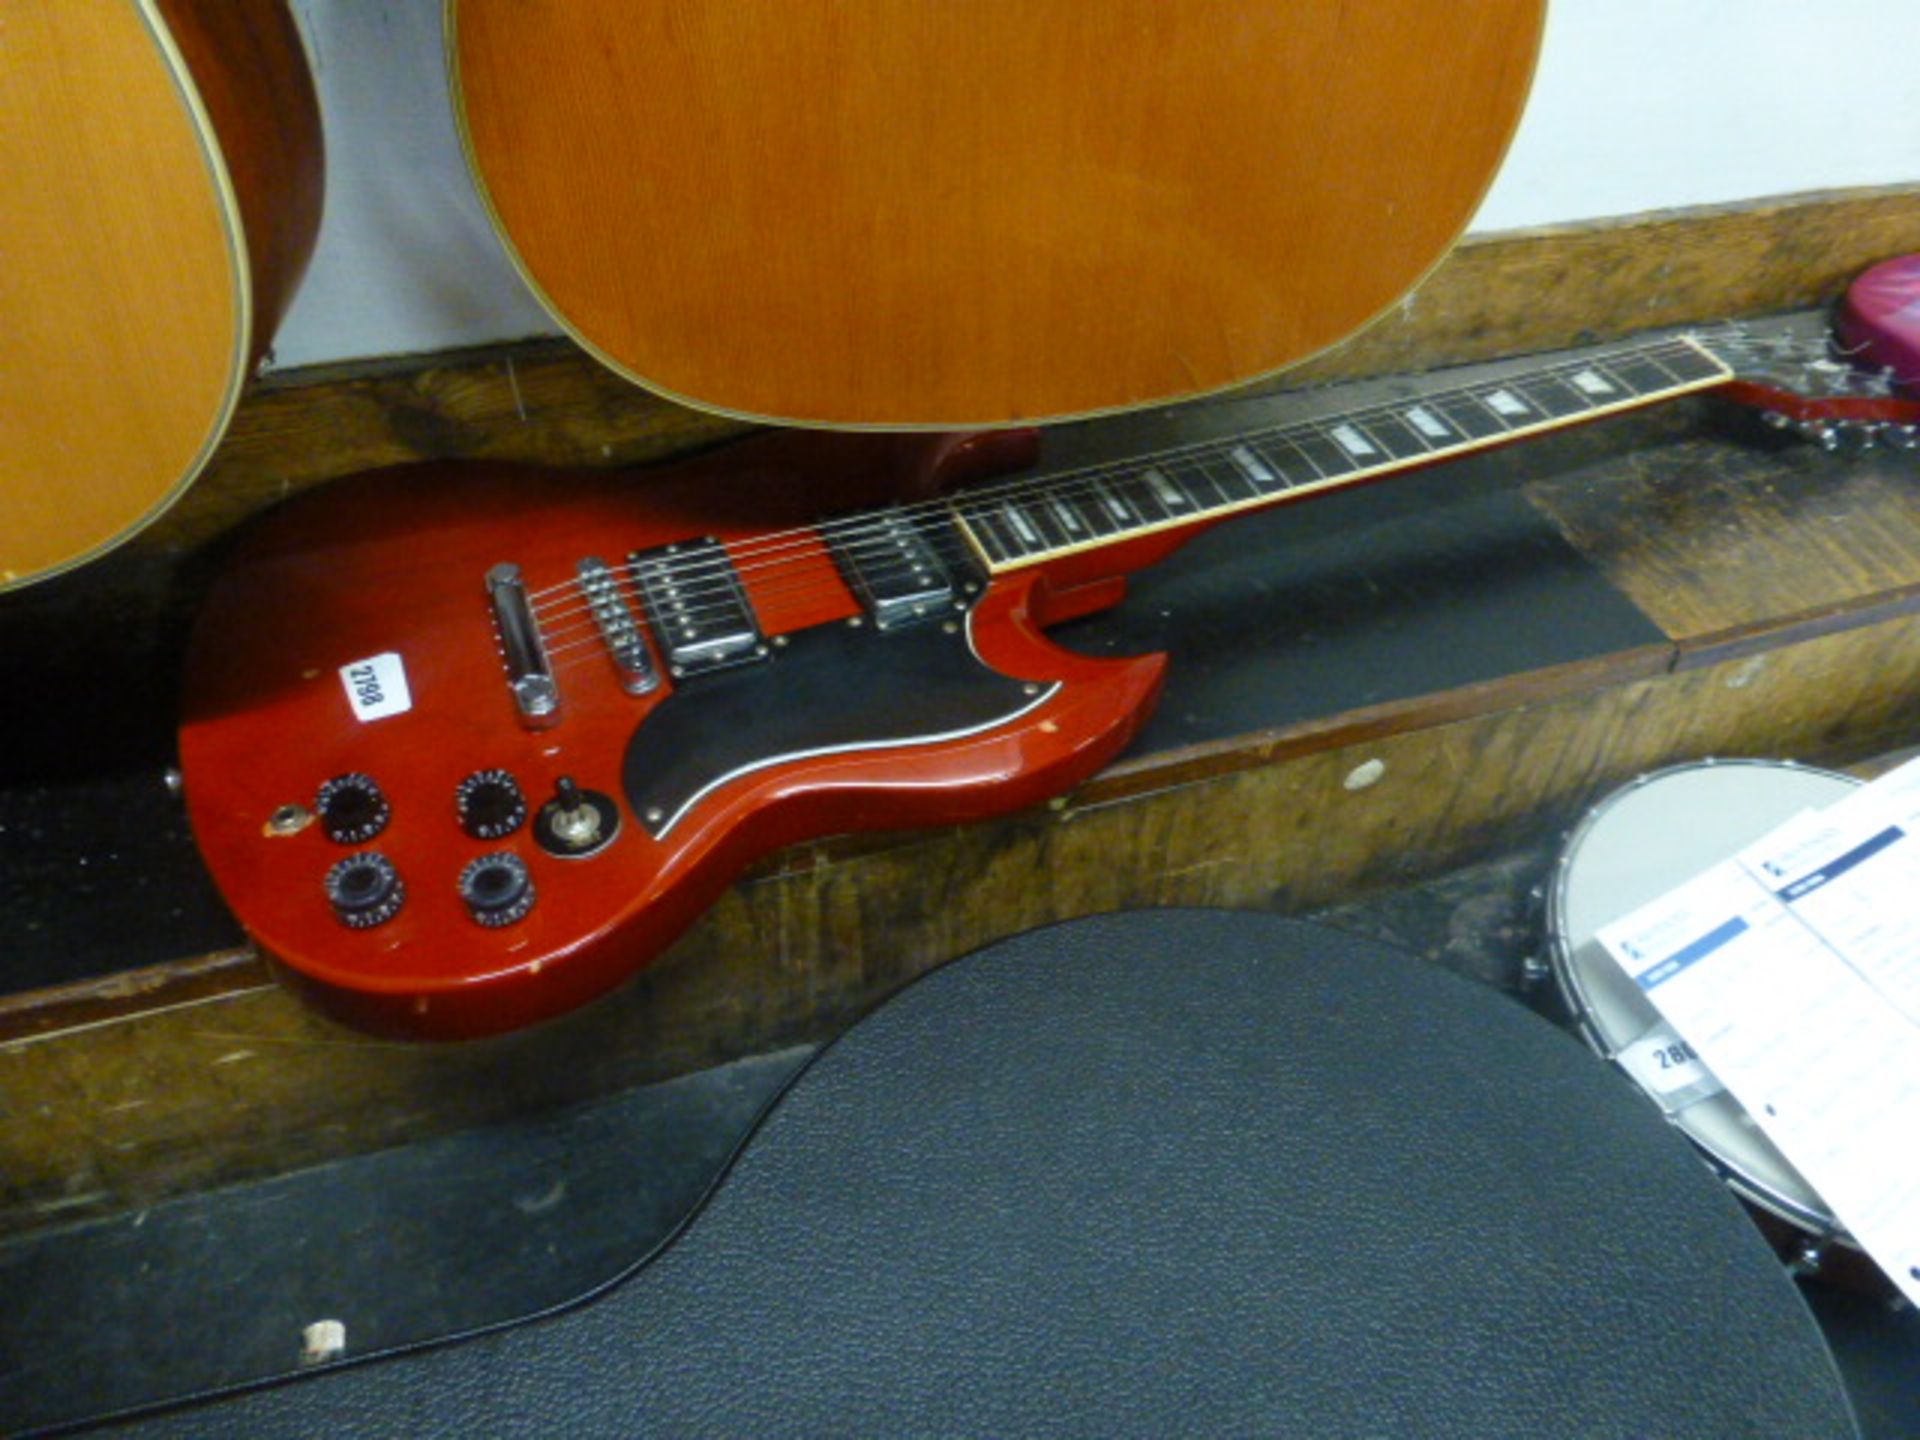 Unbranded electric guitar in red